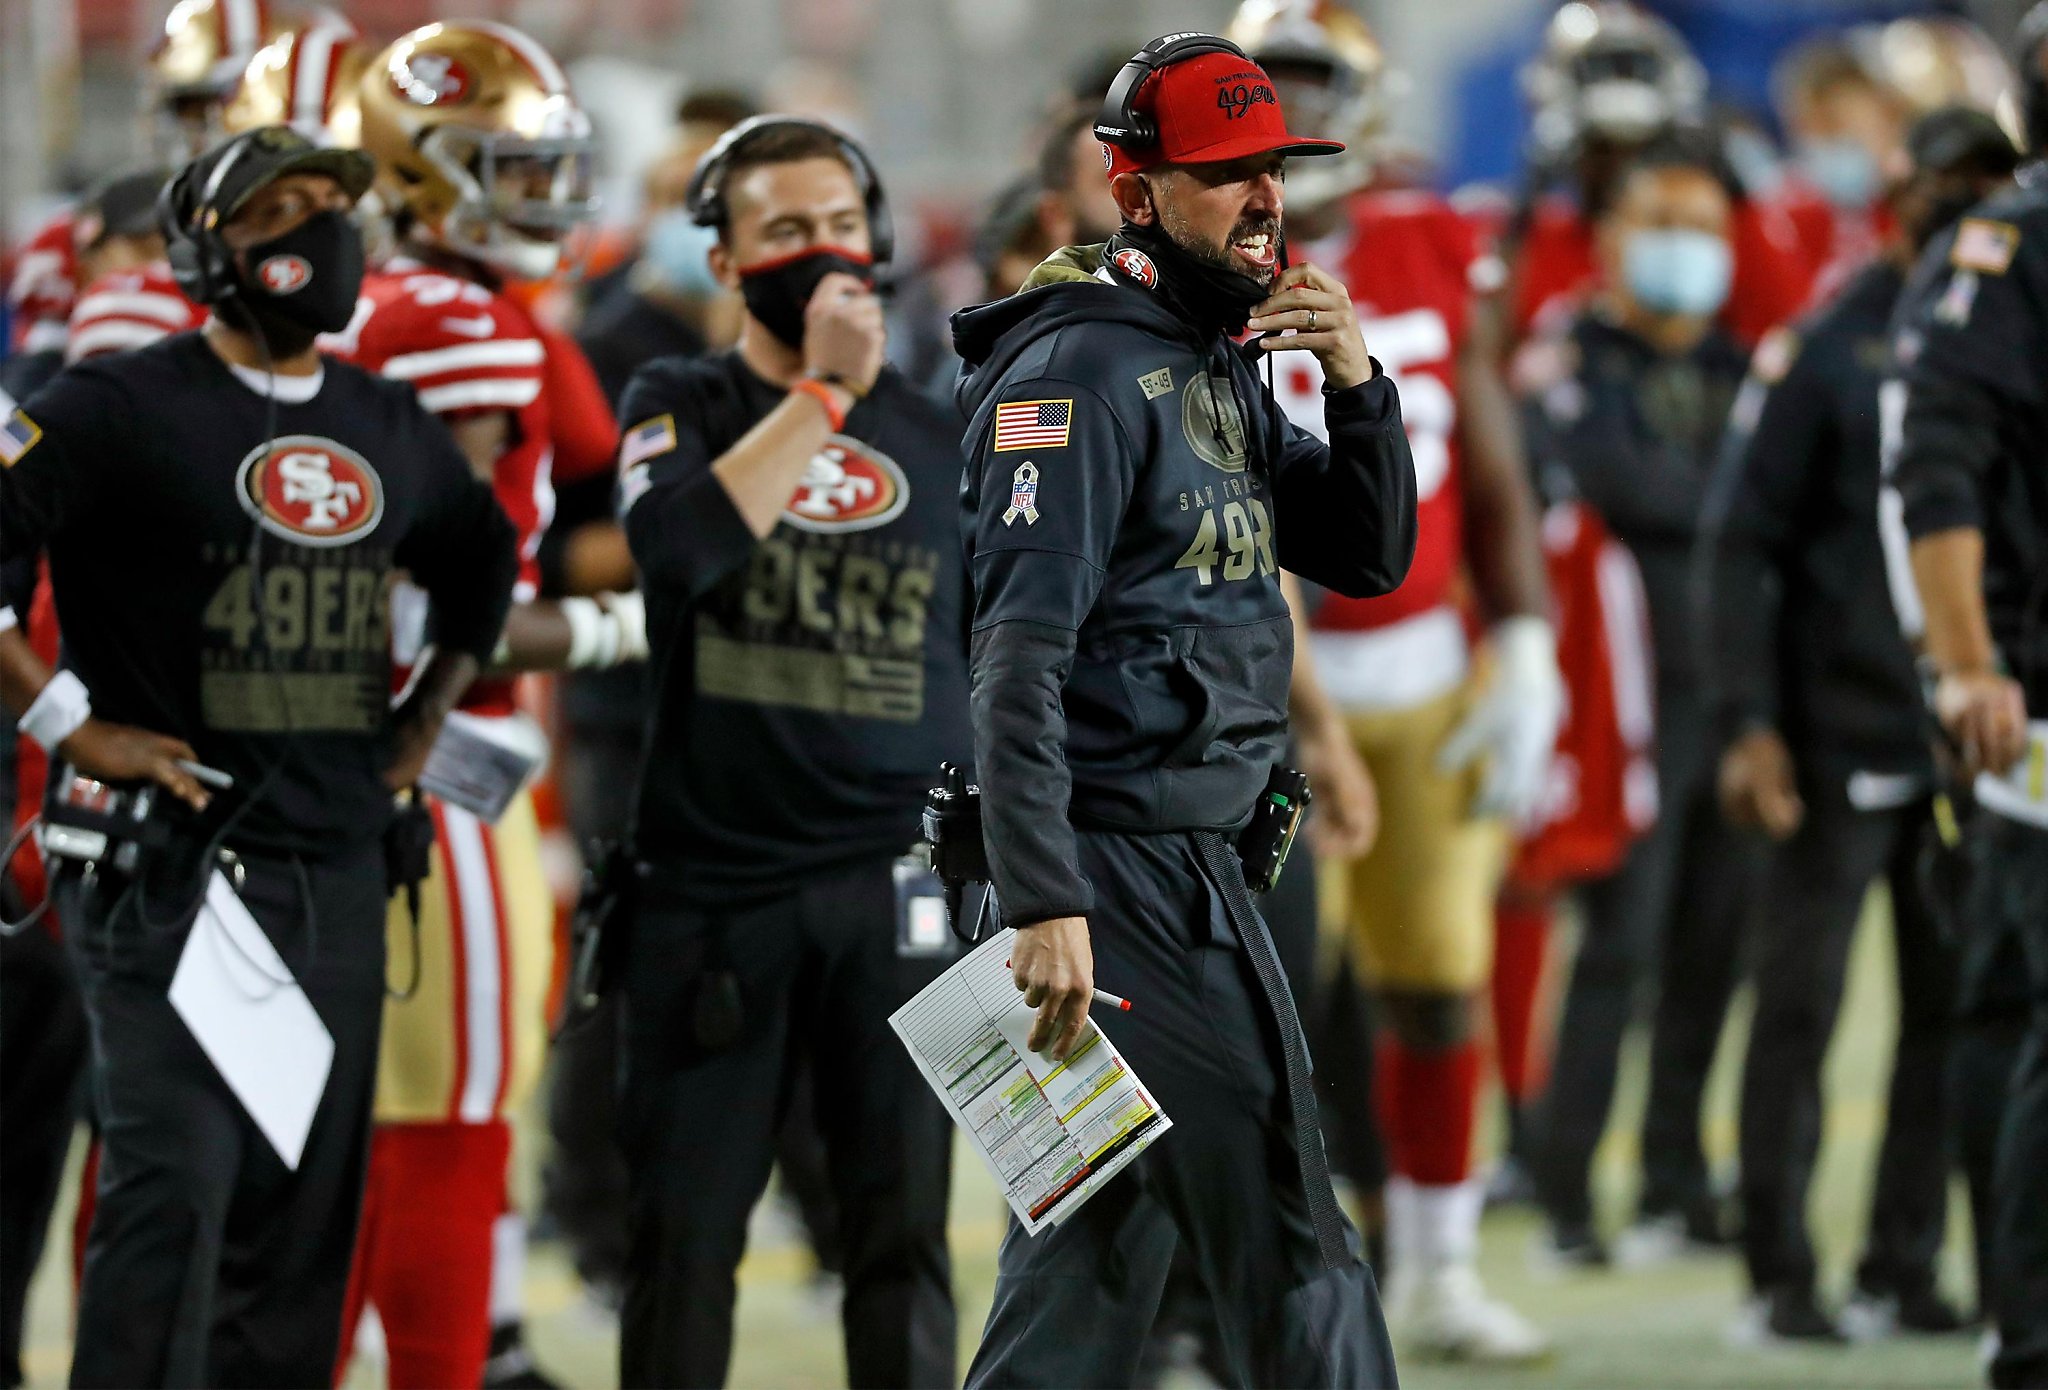 Why 49ers coach Kyle Shanahan has 'beef' with NFL over sideline